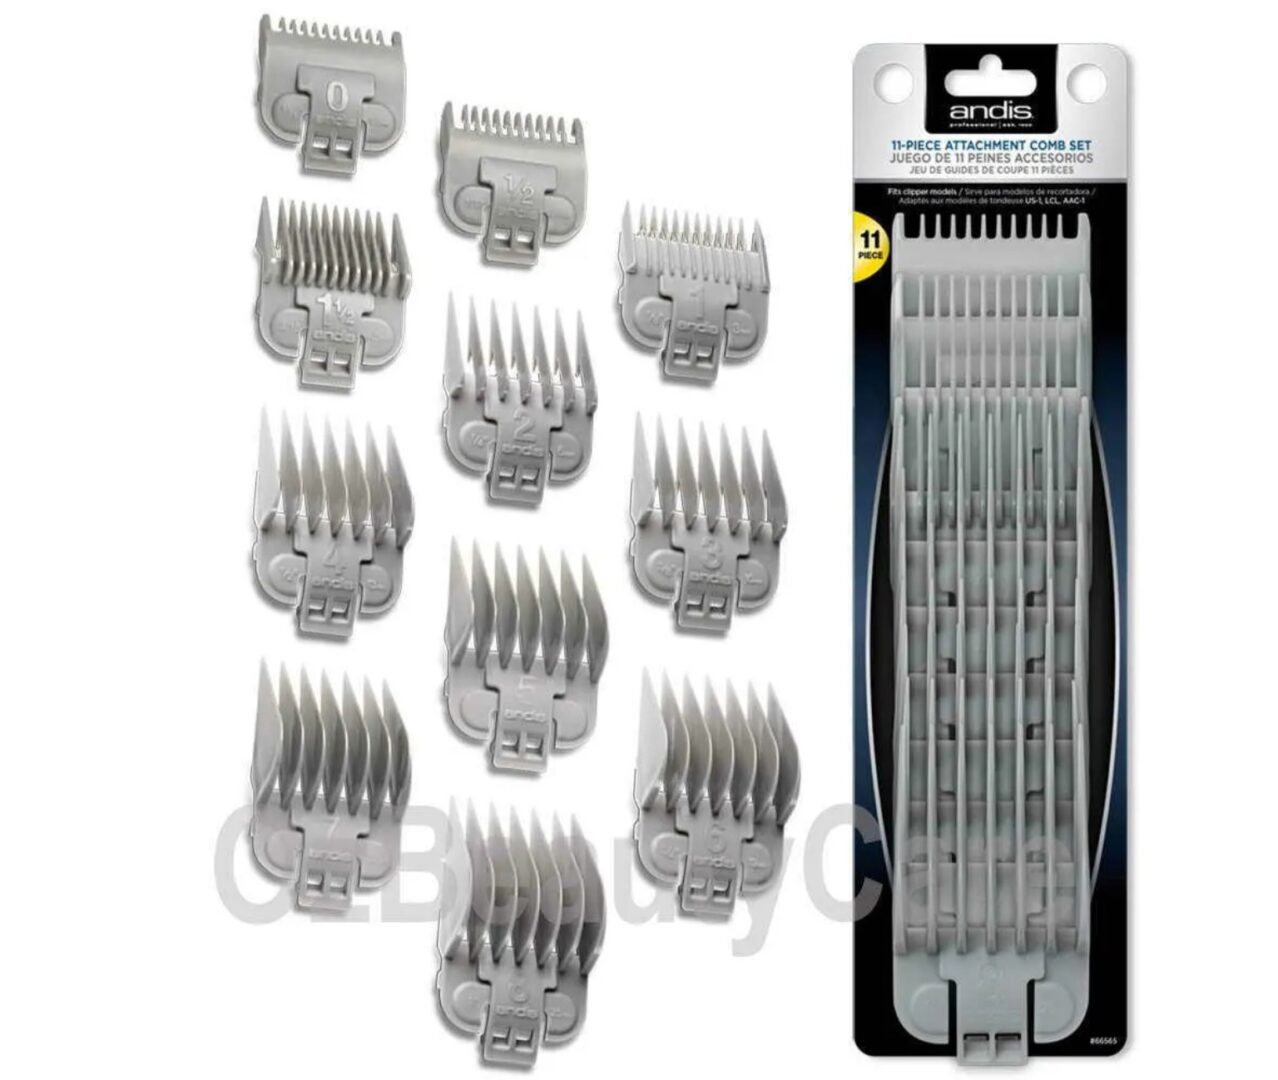 A set of 1 2 different sizes of hair clippers.